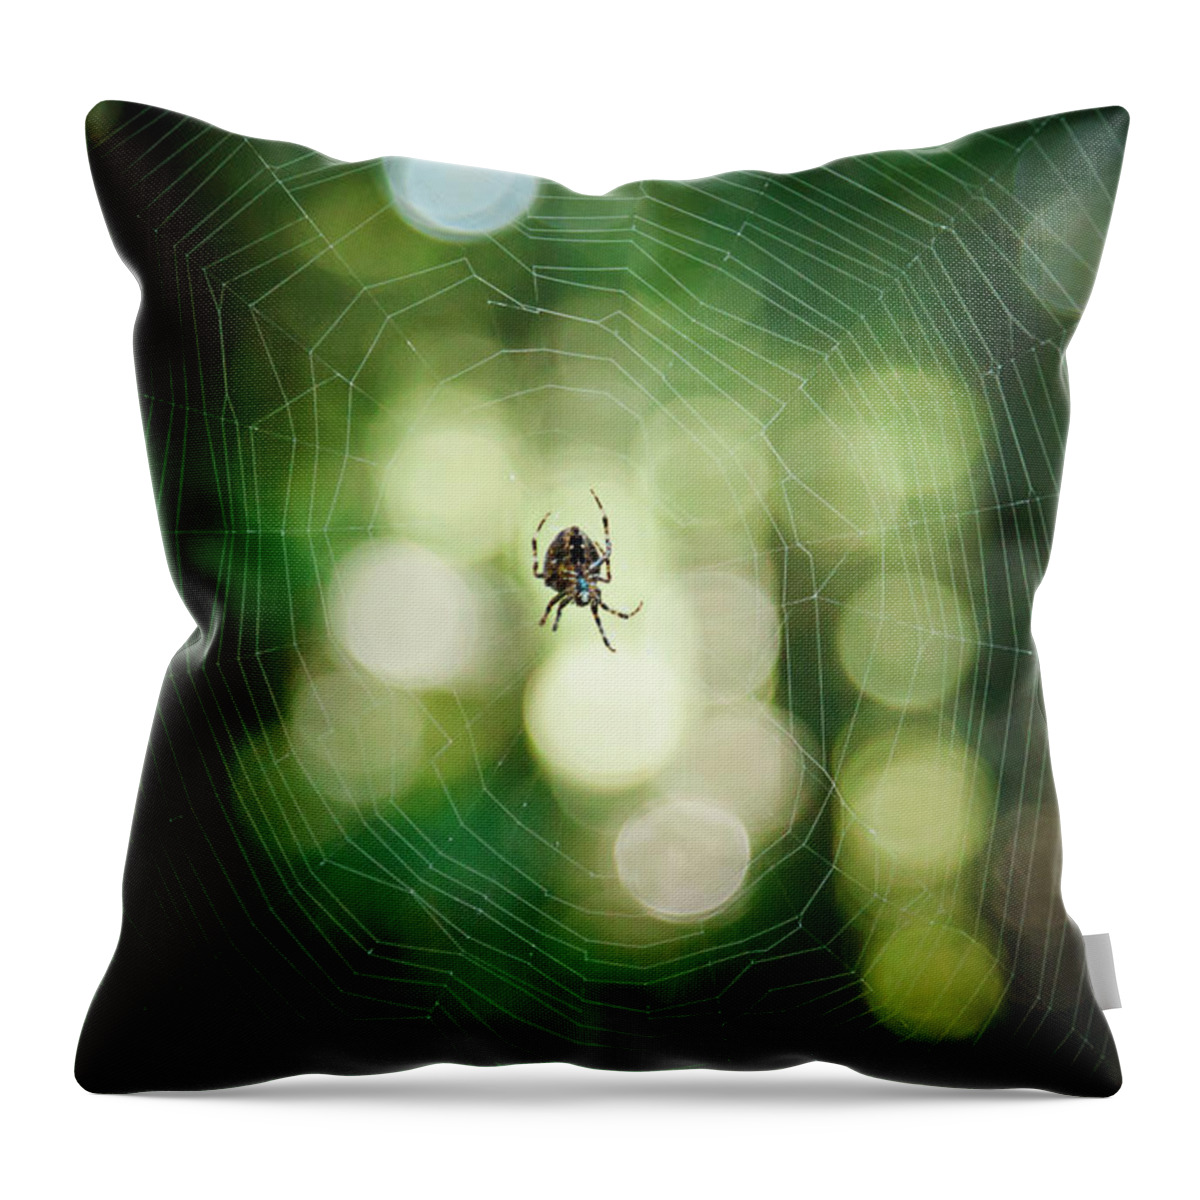 Animal Themes Throw Pillow featuring the photograph Outdoors Nature #22 by Christopher Kimmel